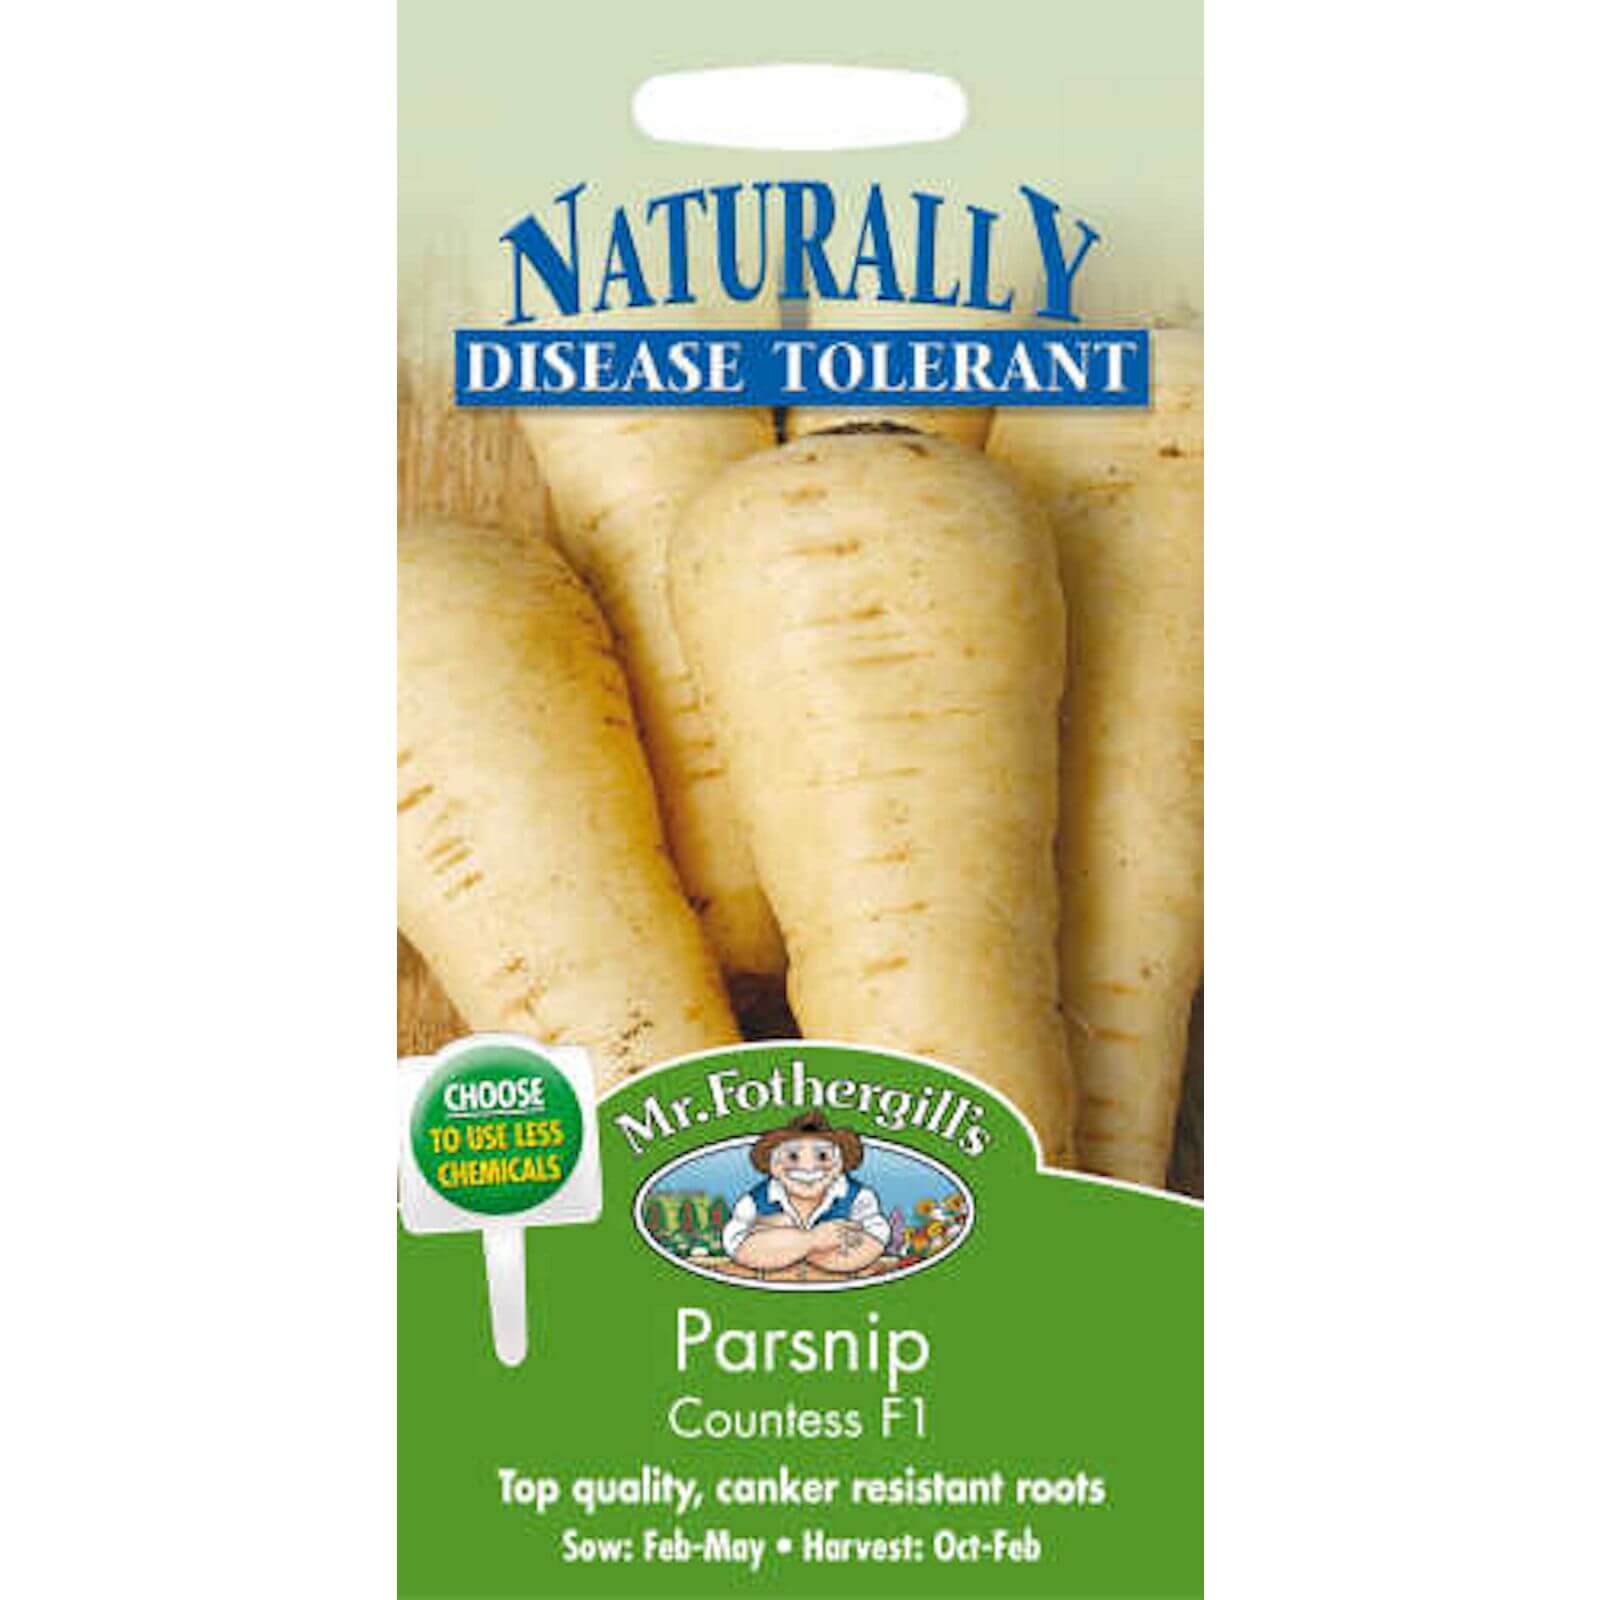 Mr. Fothergill's Parsnip Countess F1 Seeds